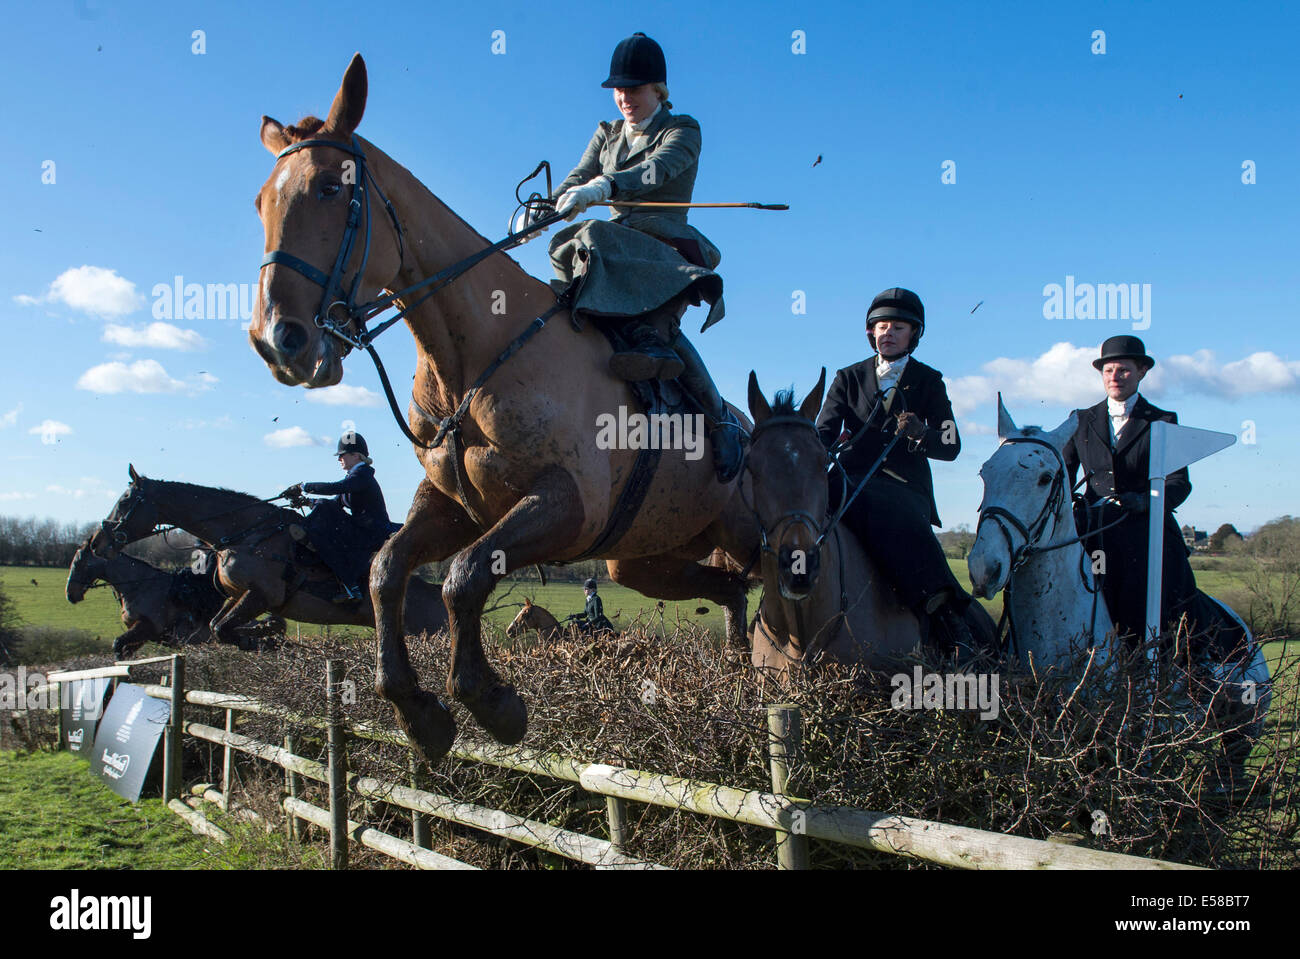 Ingarsby  The Bernard Weatherill Diana's of the chase.16 female horse riders took part in the first sidesaddle race since 1921 Stock Photo